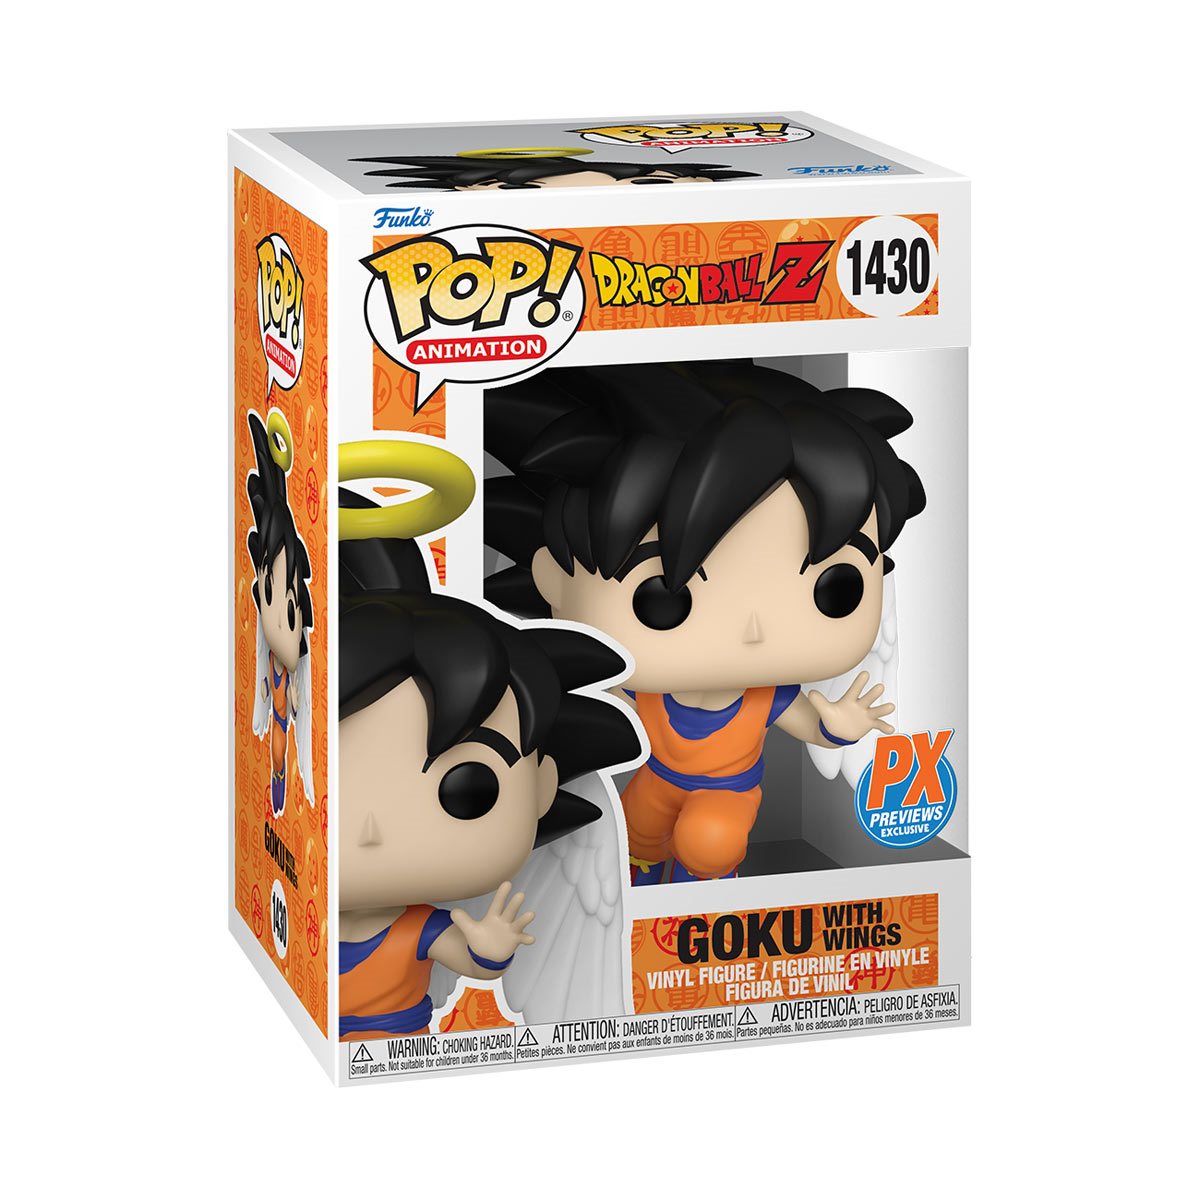 Dragon Ball Z Goku with Wings Funko Pop! Vinyl Figure #1430 - Previews Exclusive in a box front view - Heretoserveyou